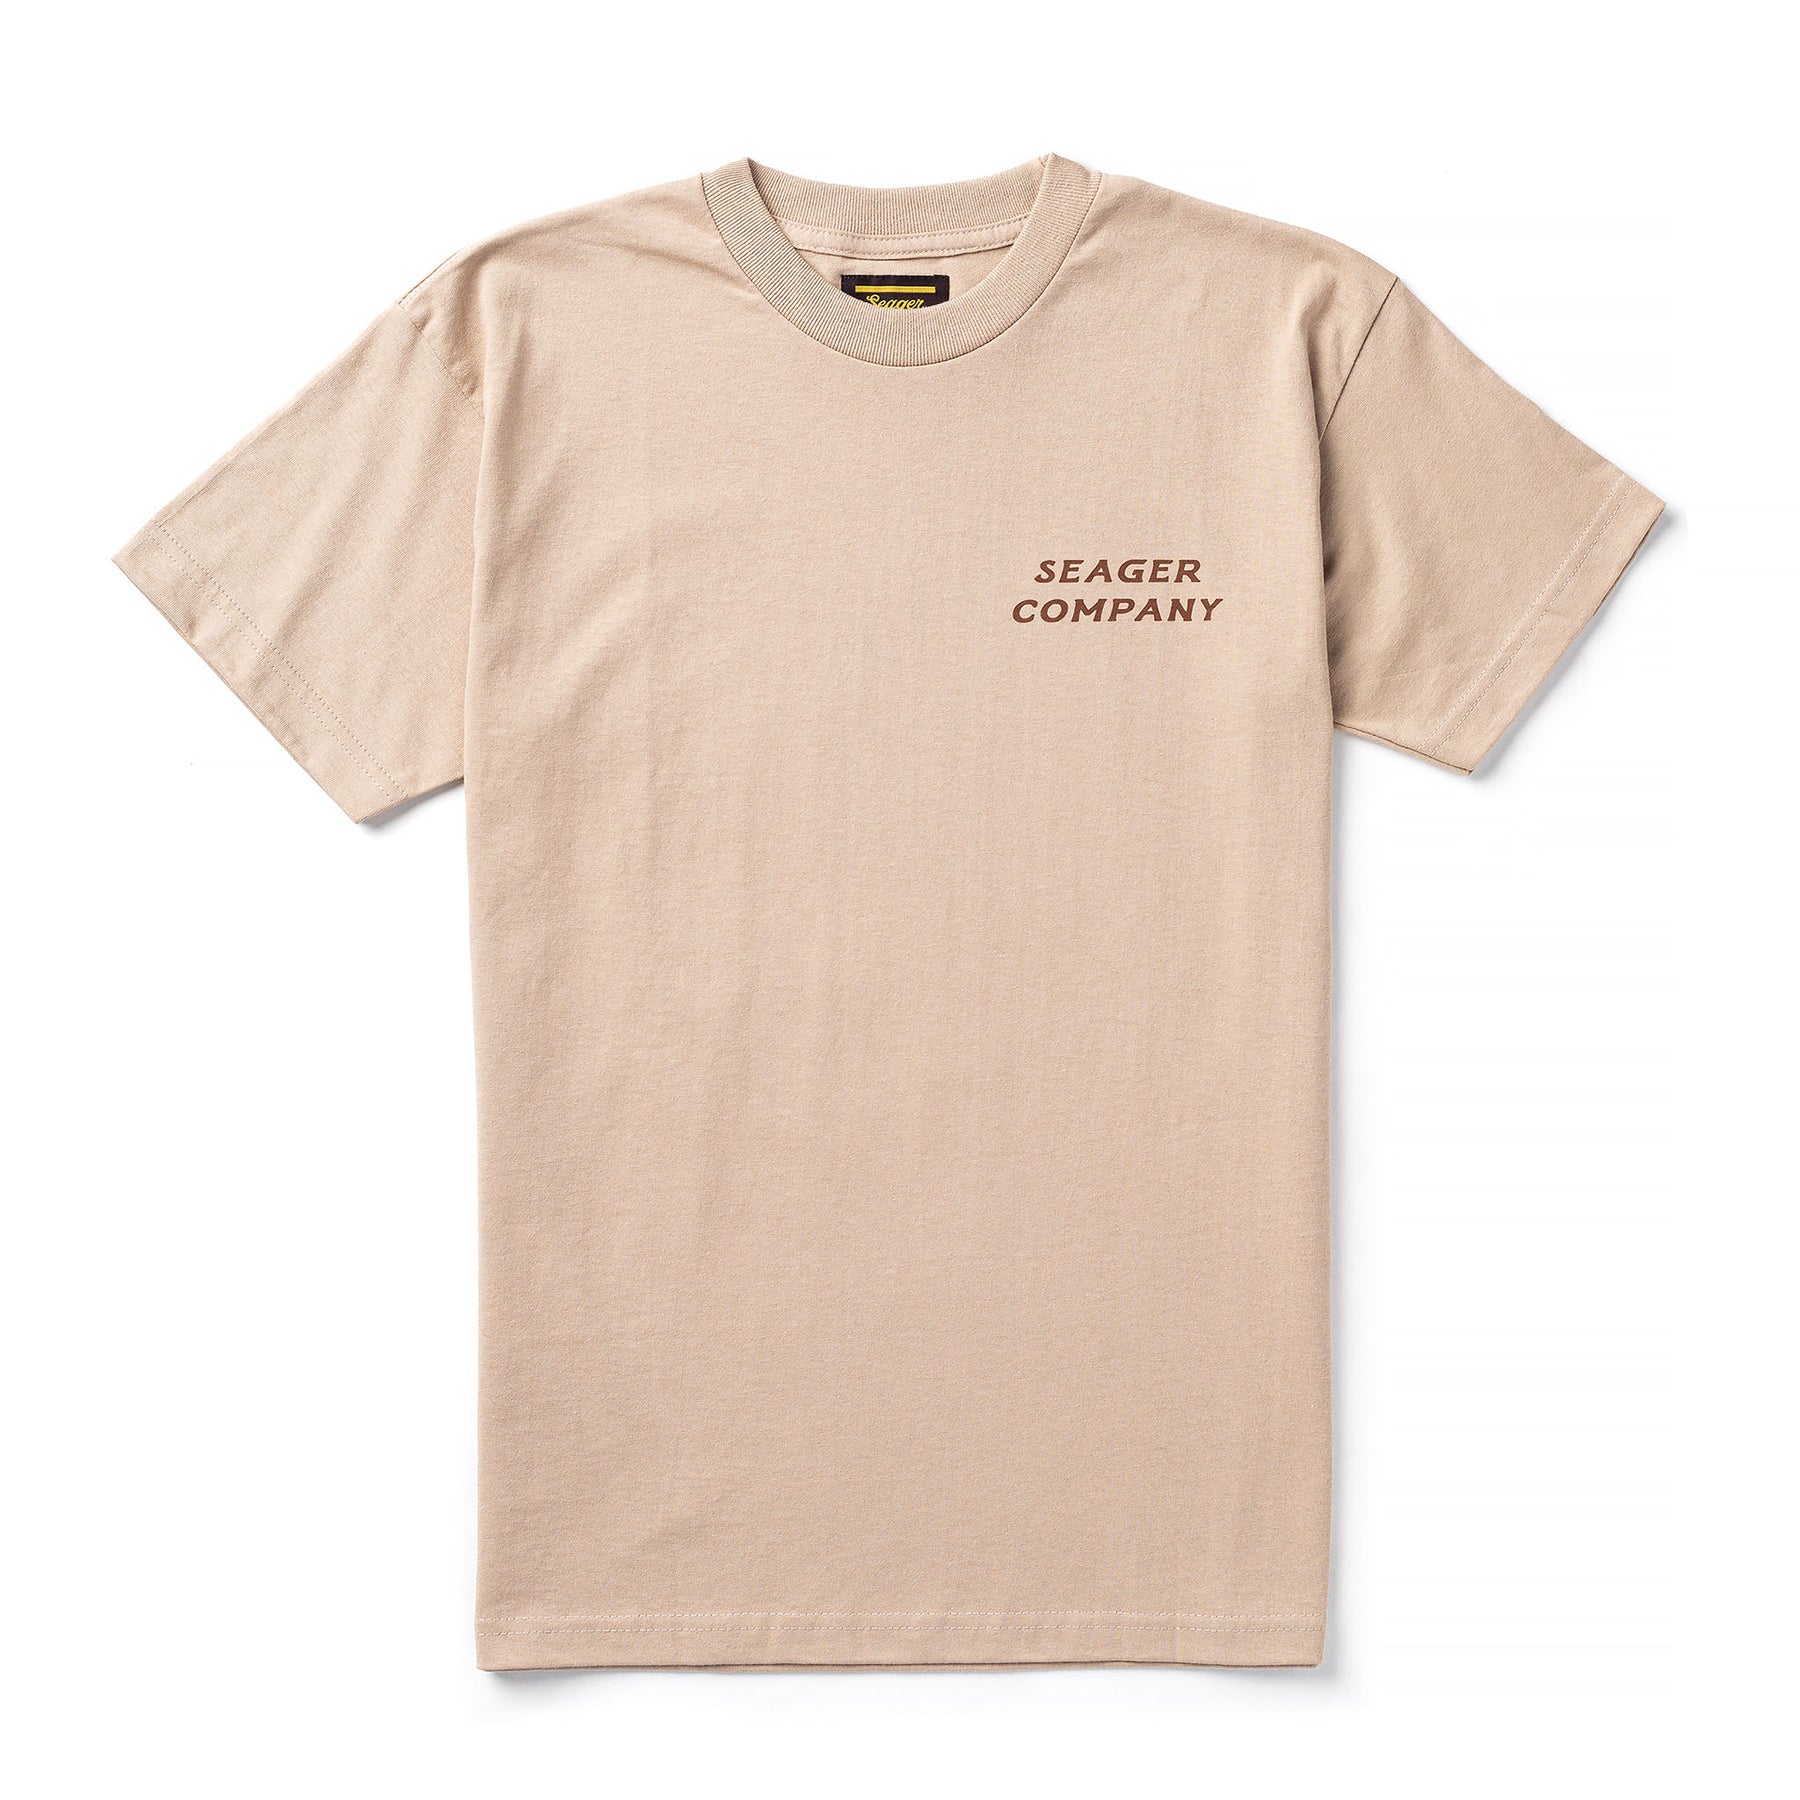 TEES | Seager Co.